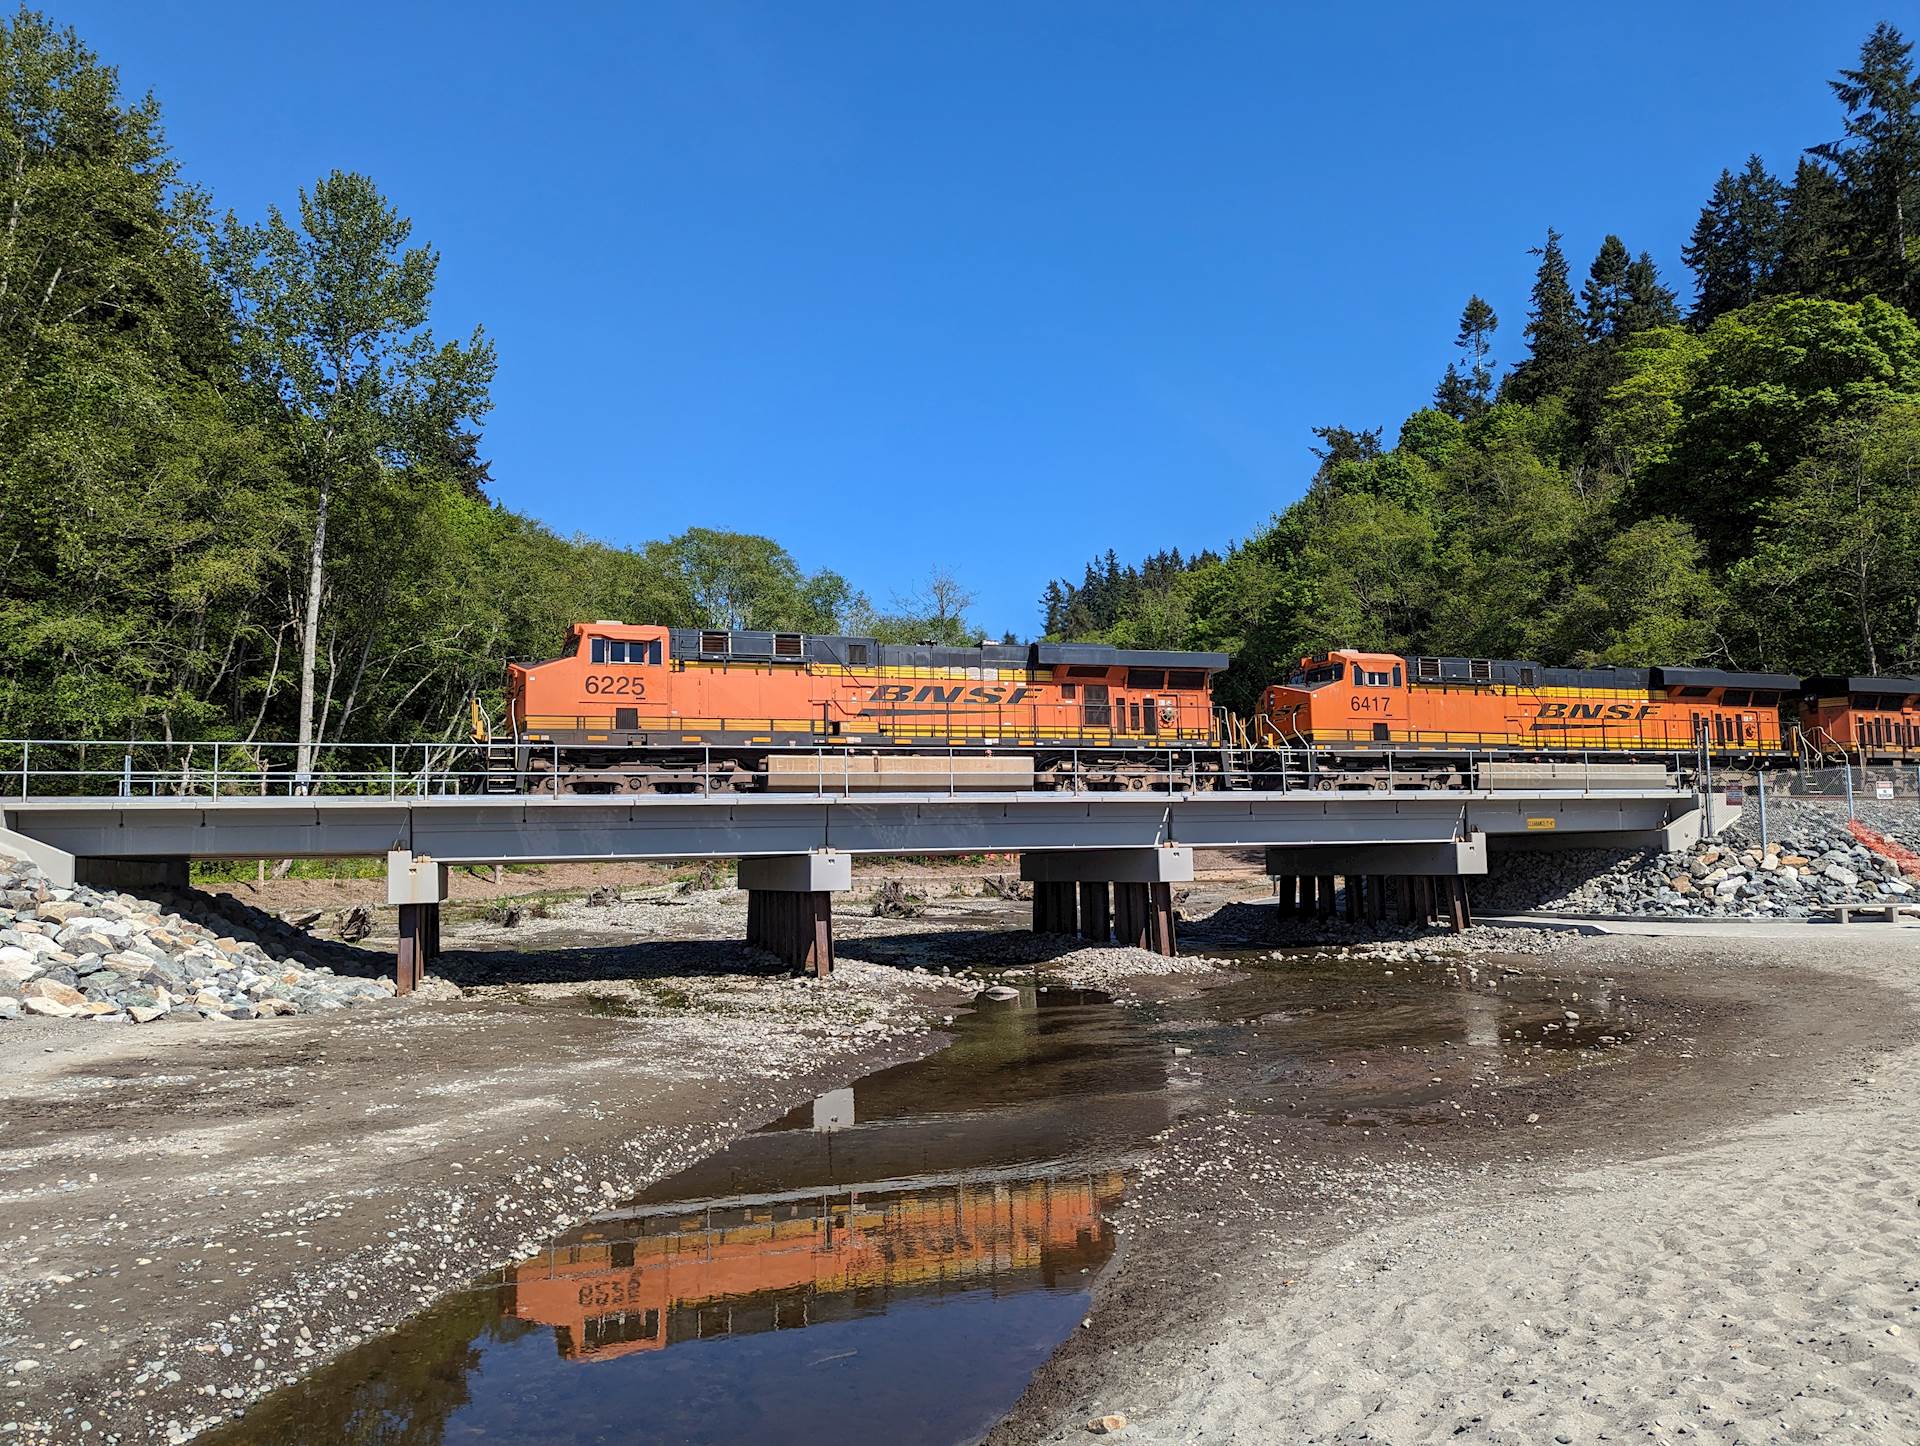 A train crosses a new bridge over an improved estuary for fish, with a line of trees in the background